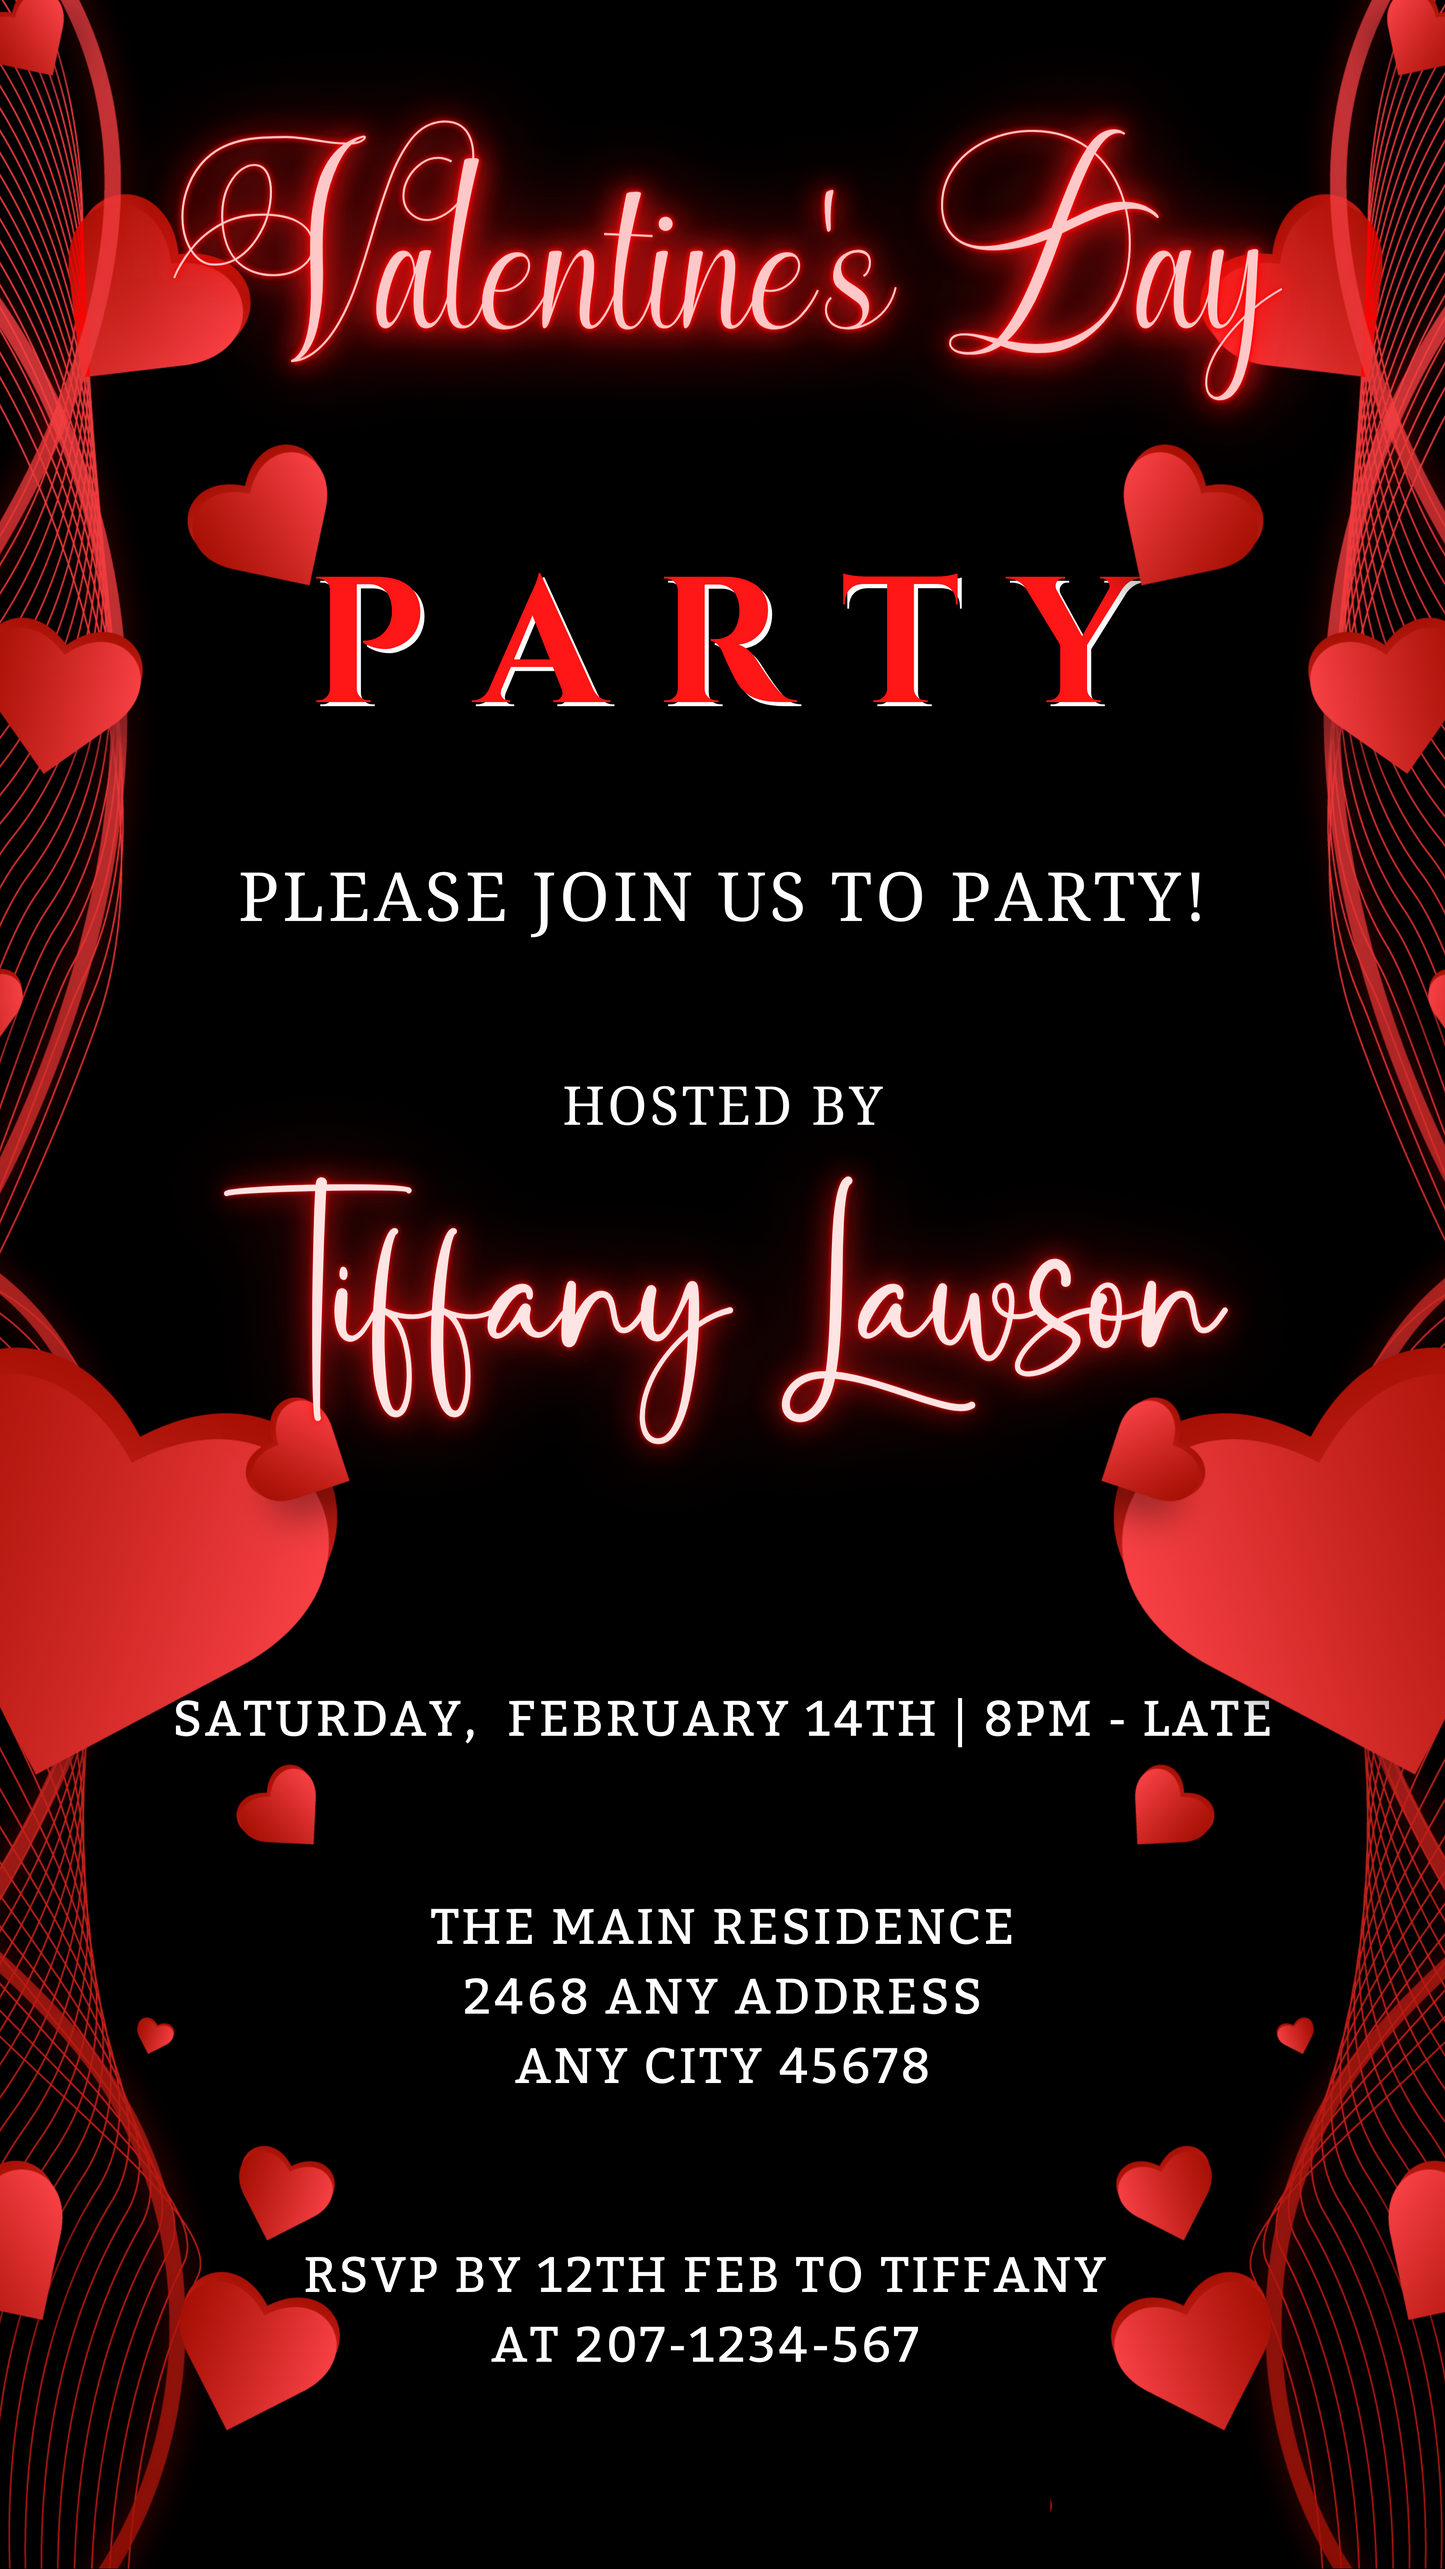 Black Neon Red Boarder Hearts Valentines Party Evite featuring red hearts and customizable text, downloadable for editing via Canva on smartphones, tablets, or PCs.